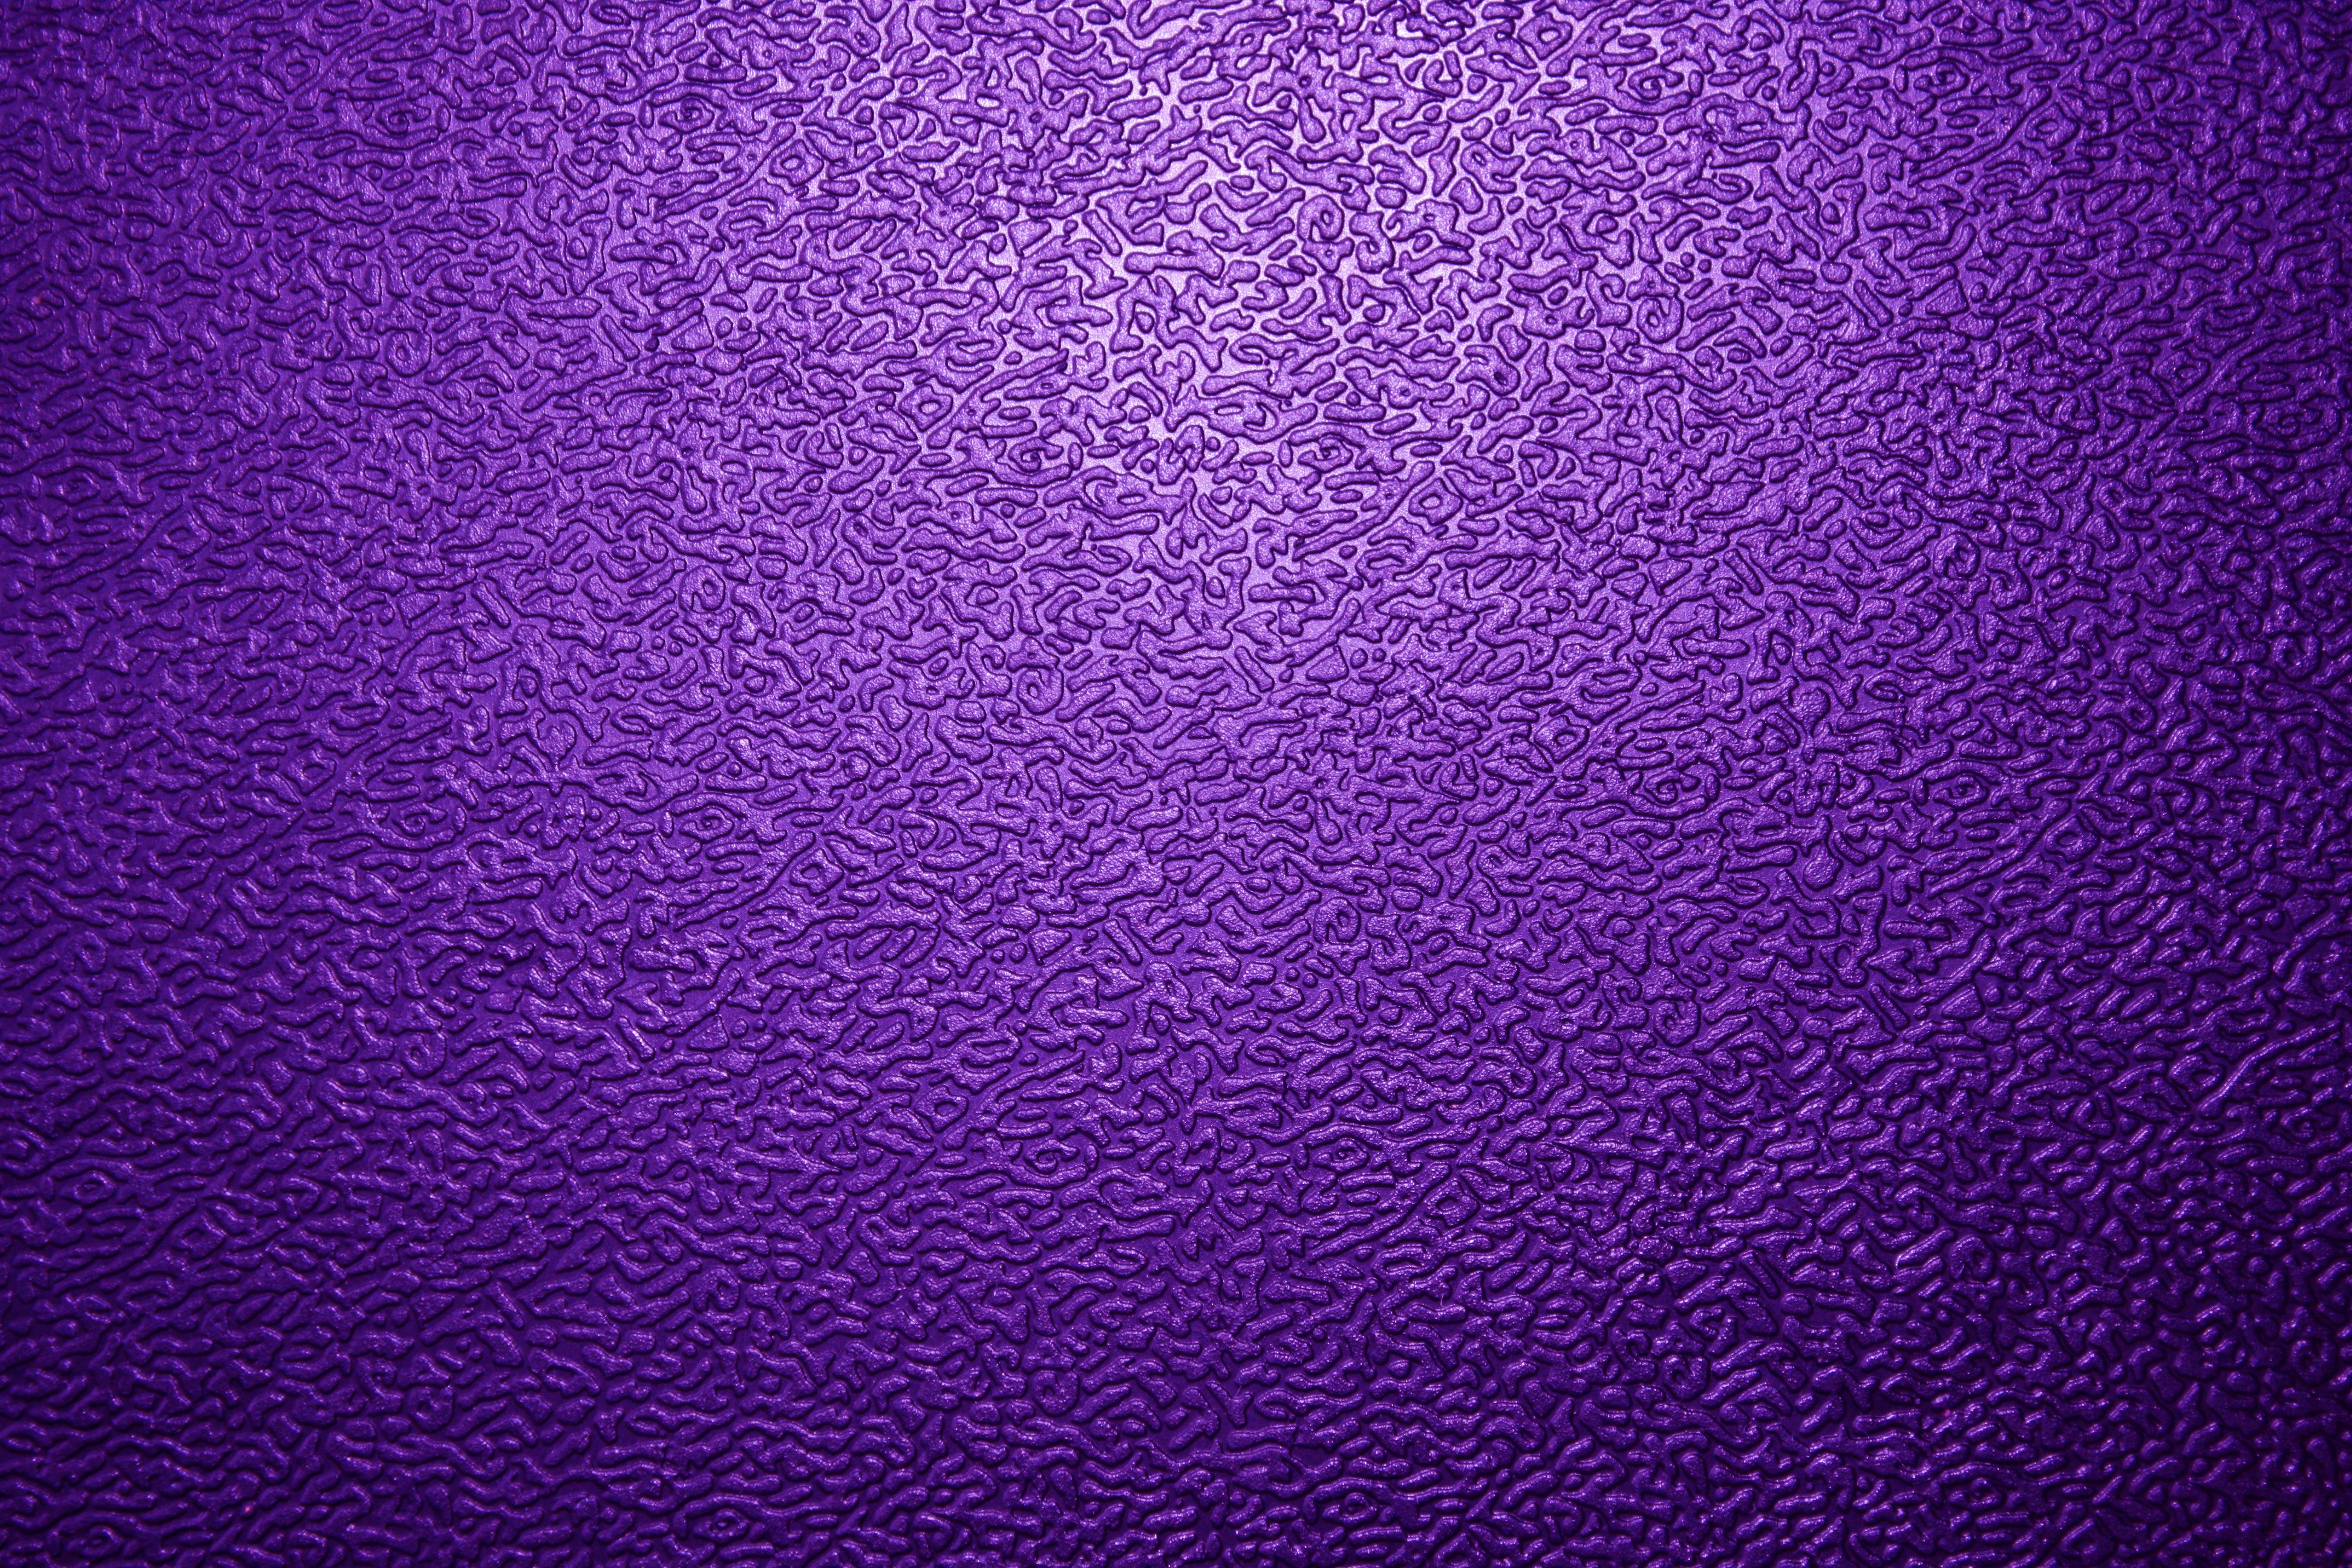  affordable pay as you make quality violet purple textured background